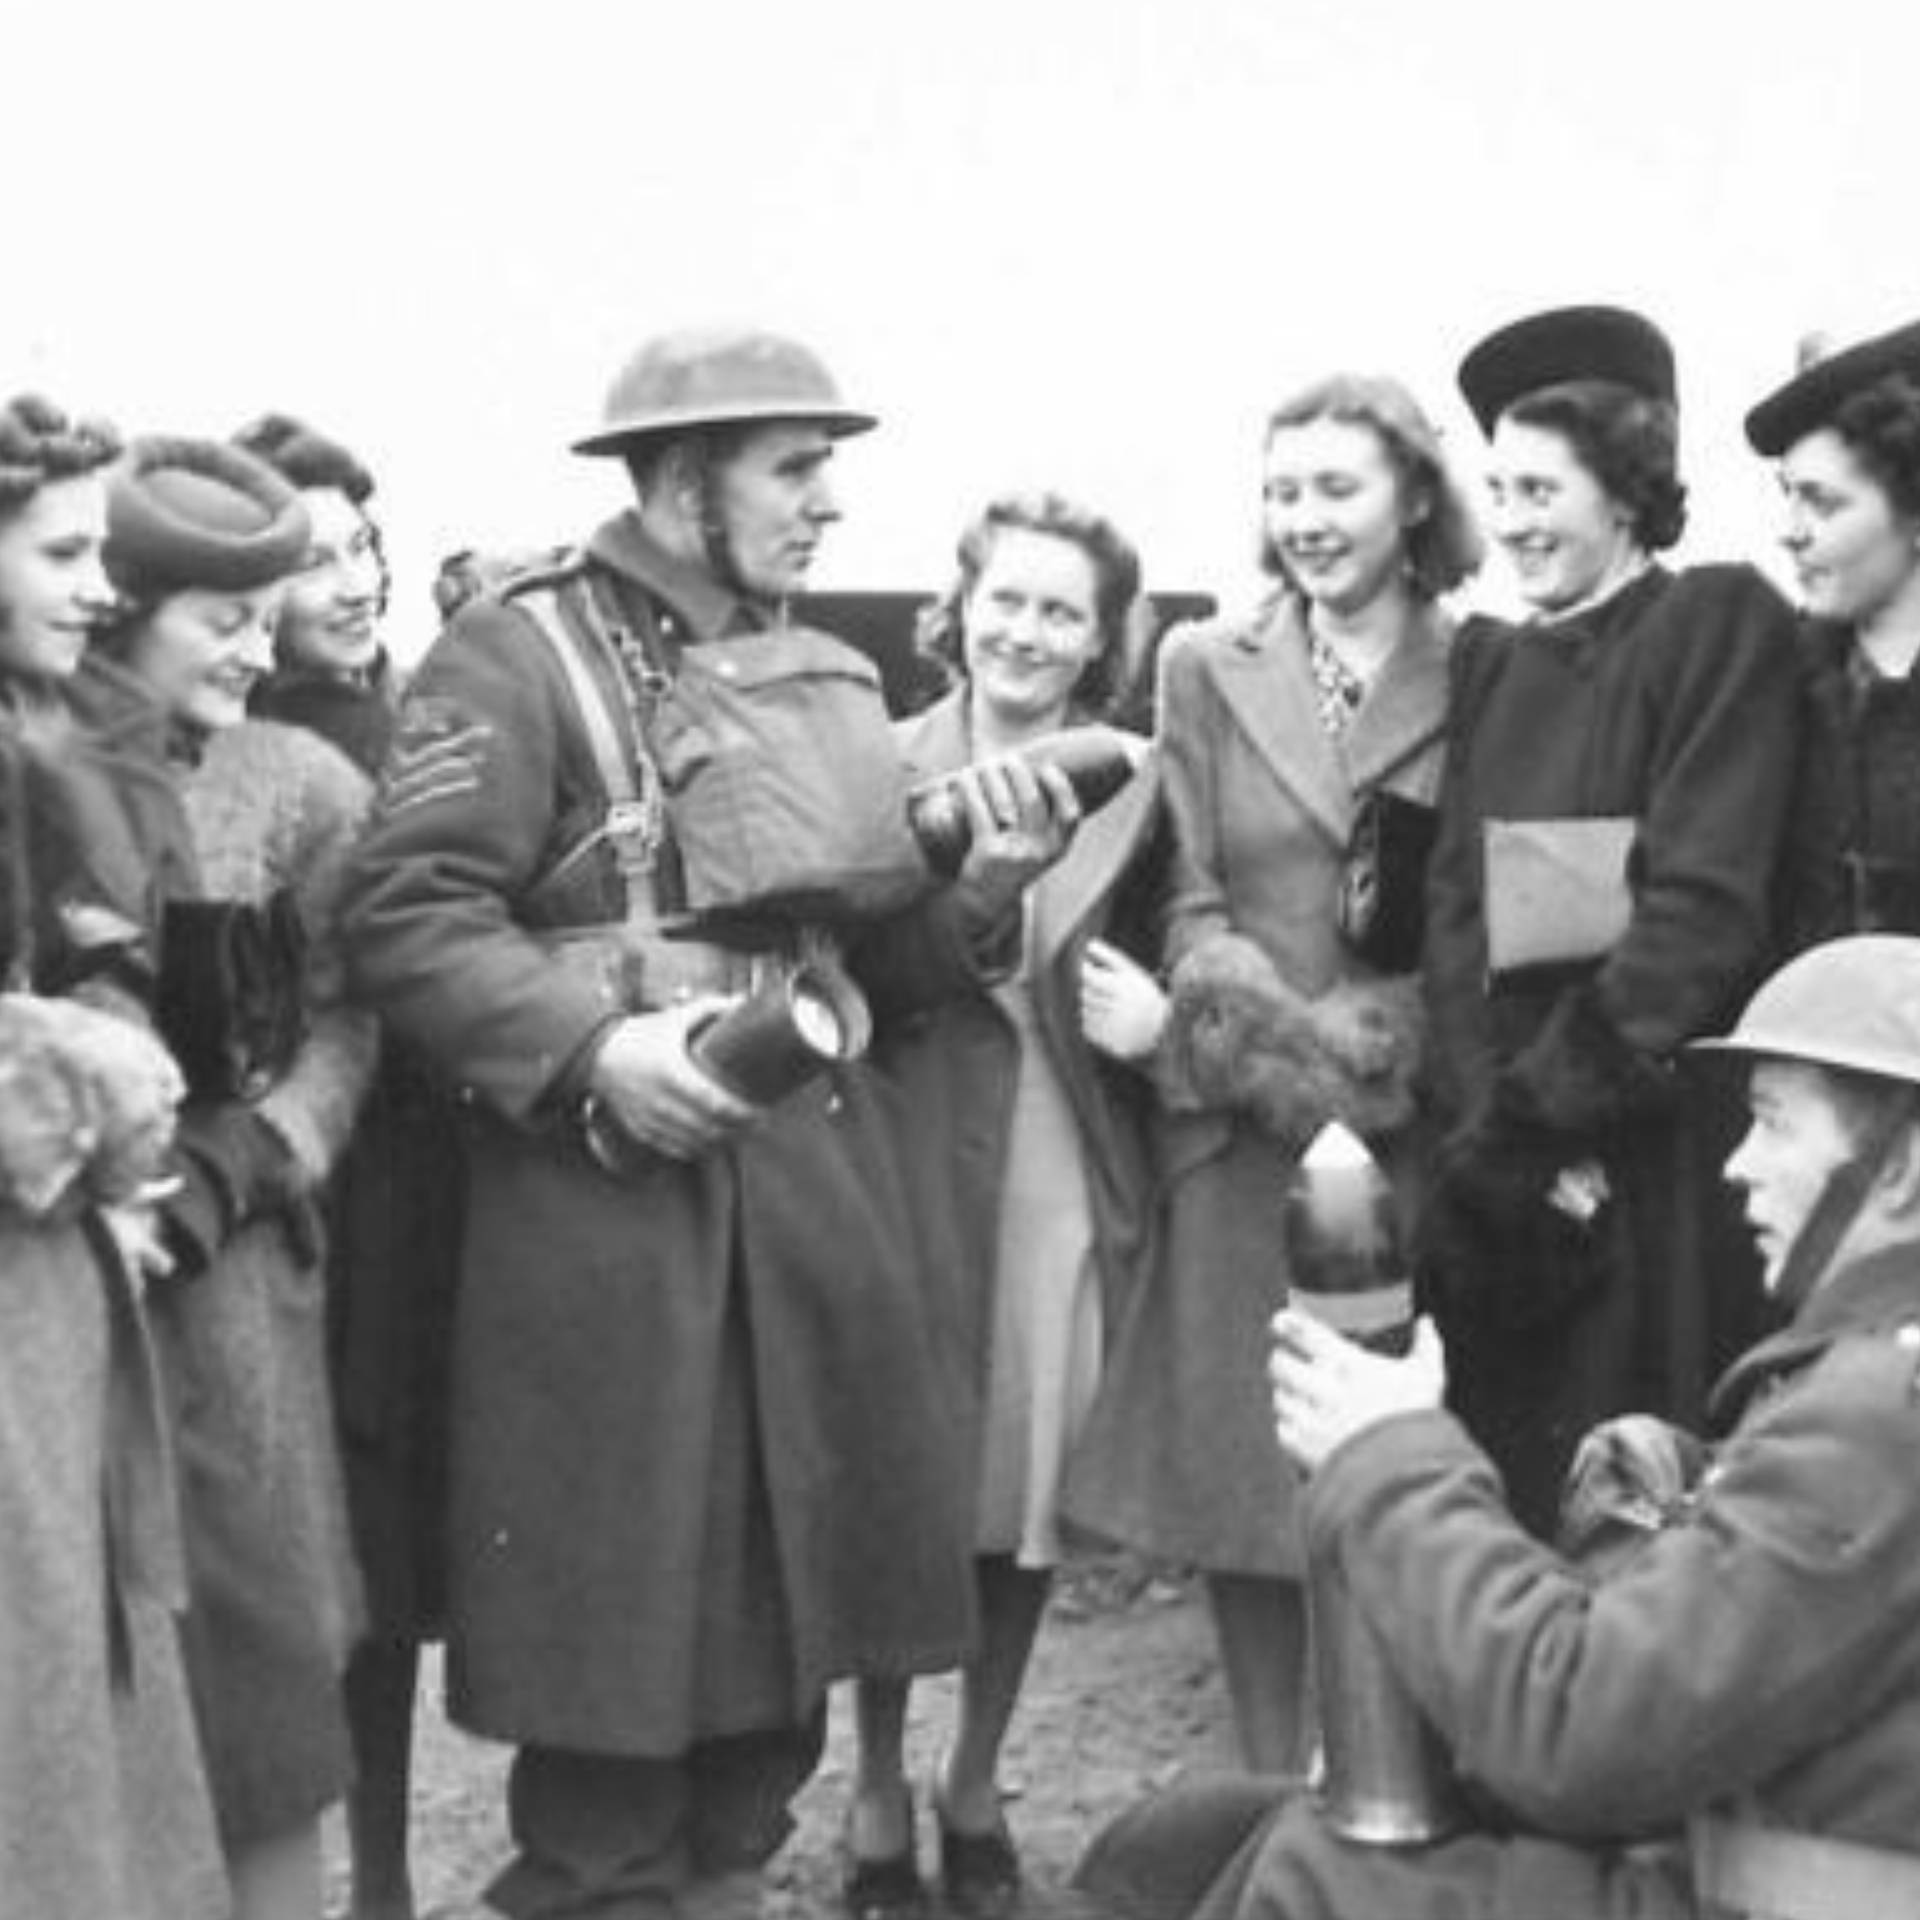 A 5th Divisional Artillery Sergeant shows shells to a group of workers from a munitions factory in Northern Ireland.